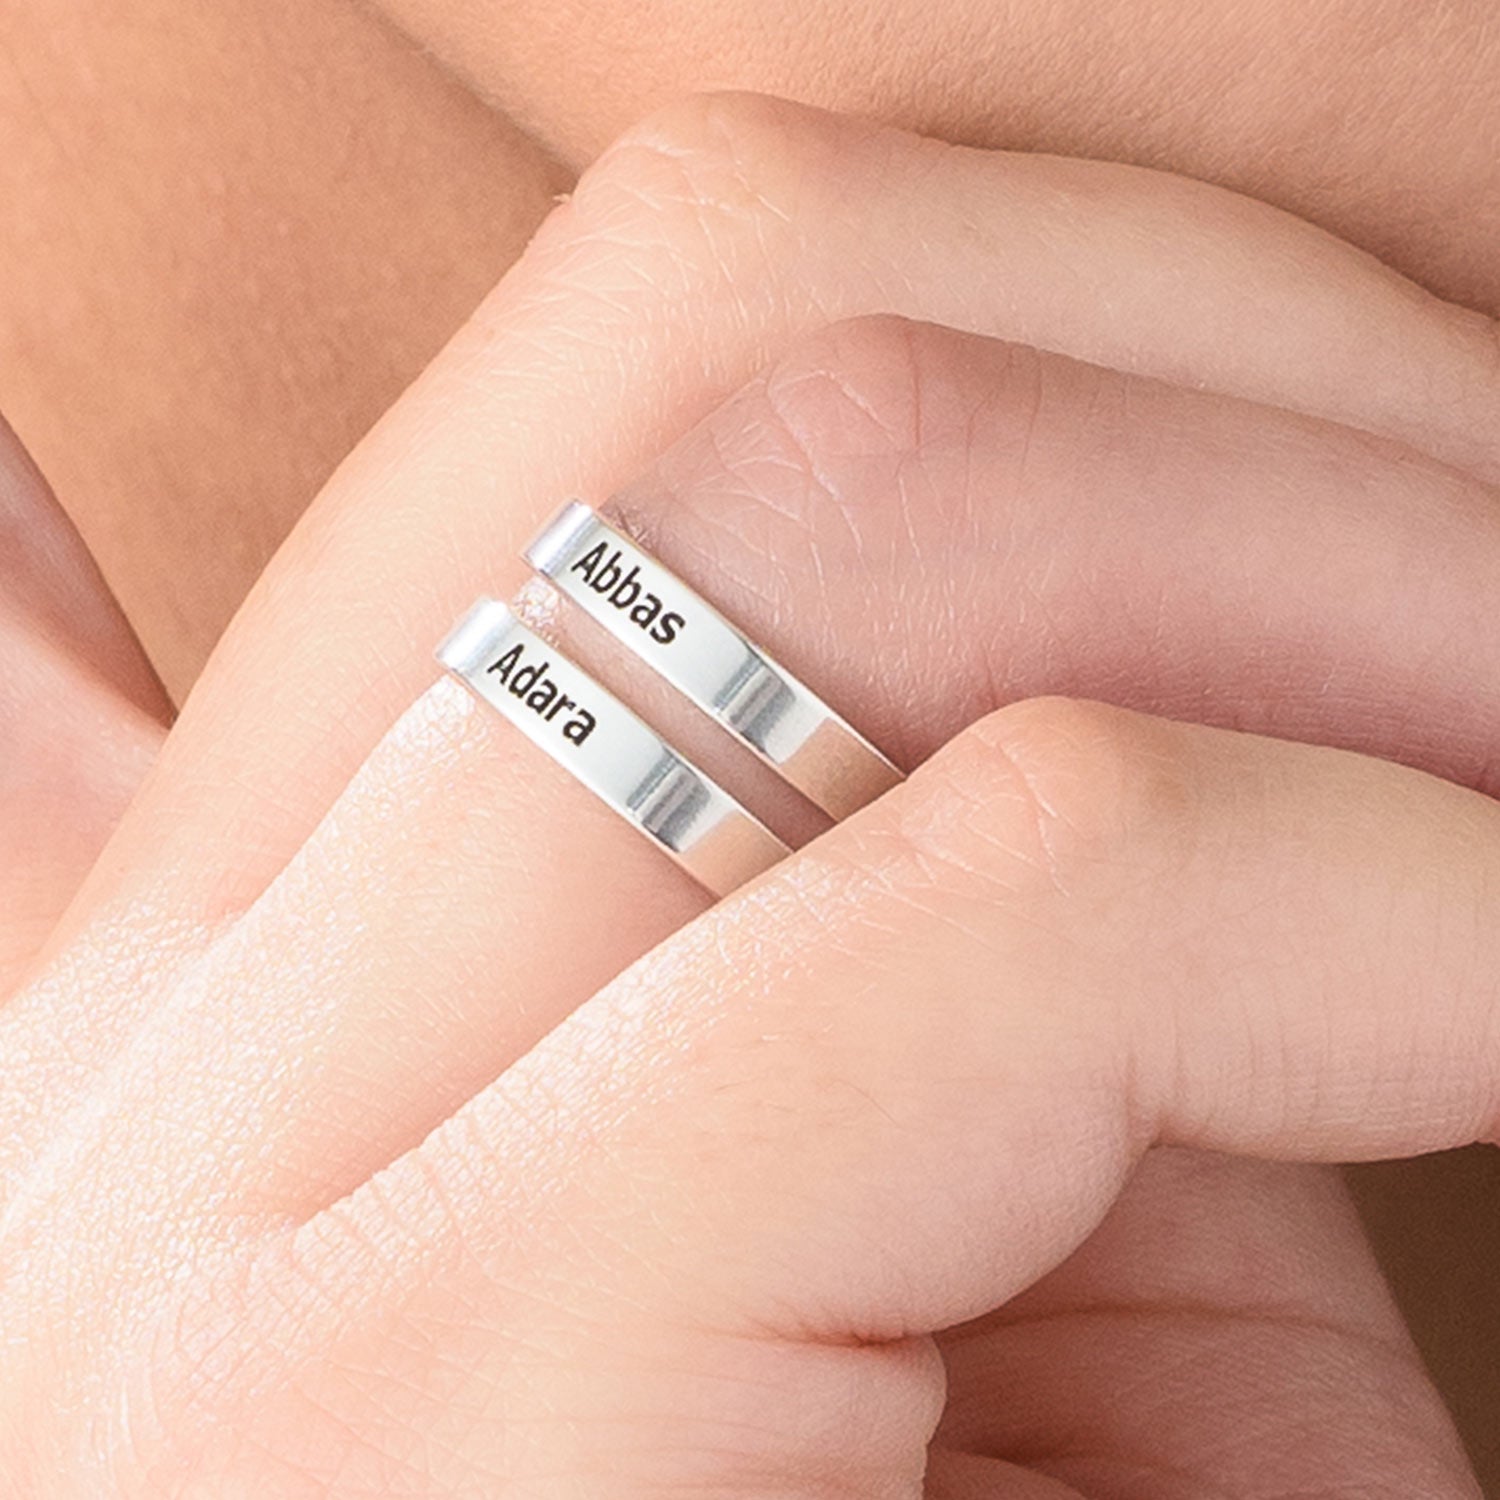 Sterling silver ring with two names